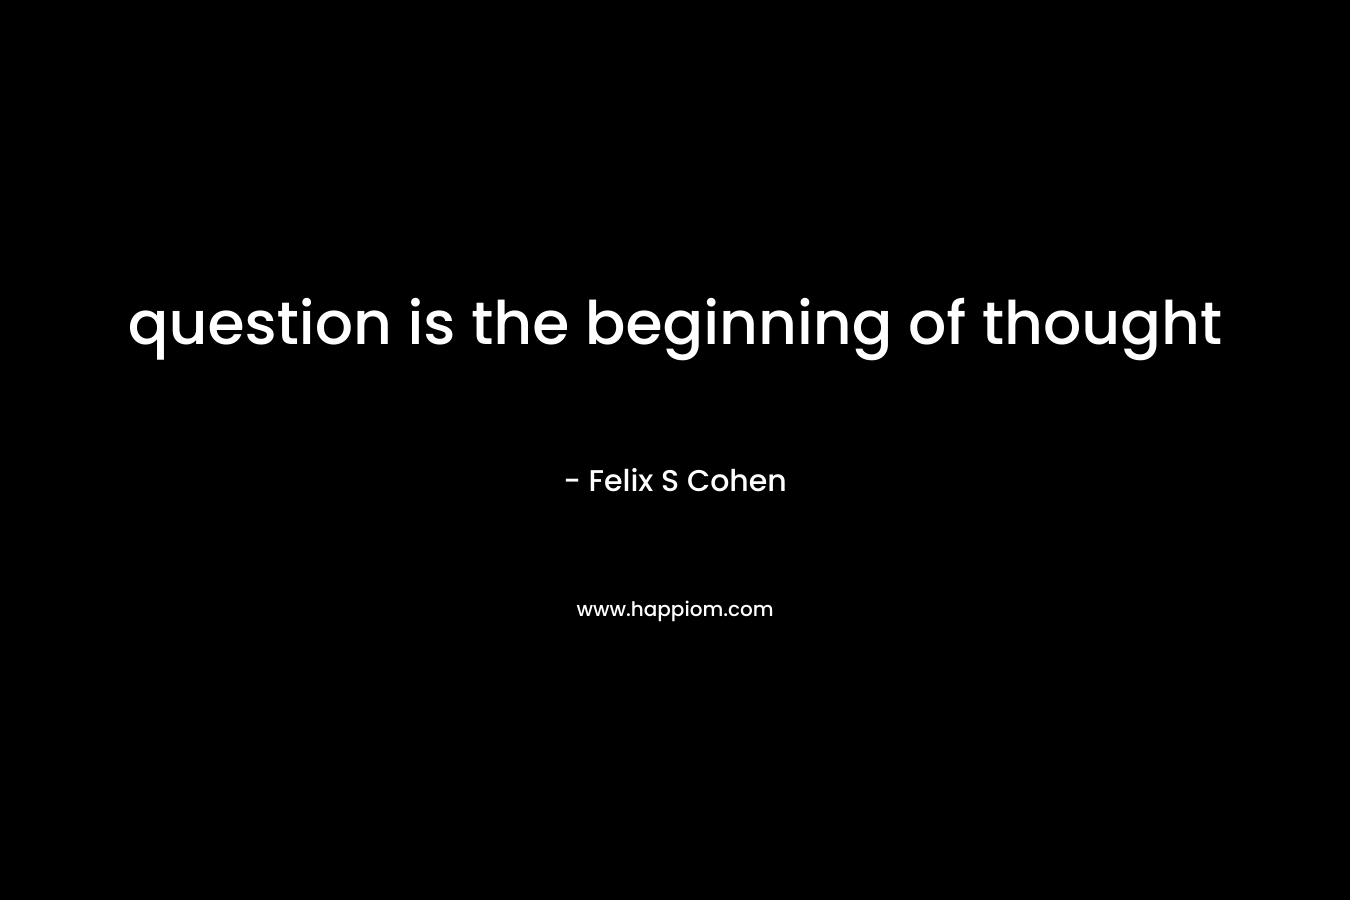 question is the beginning of thought